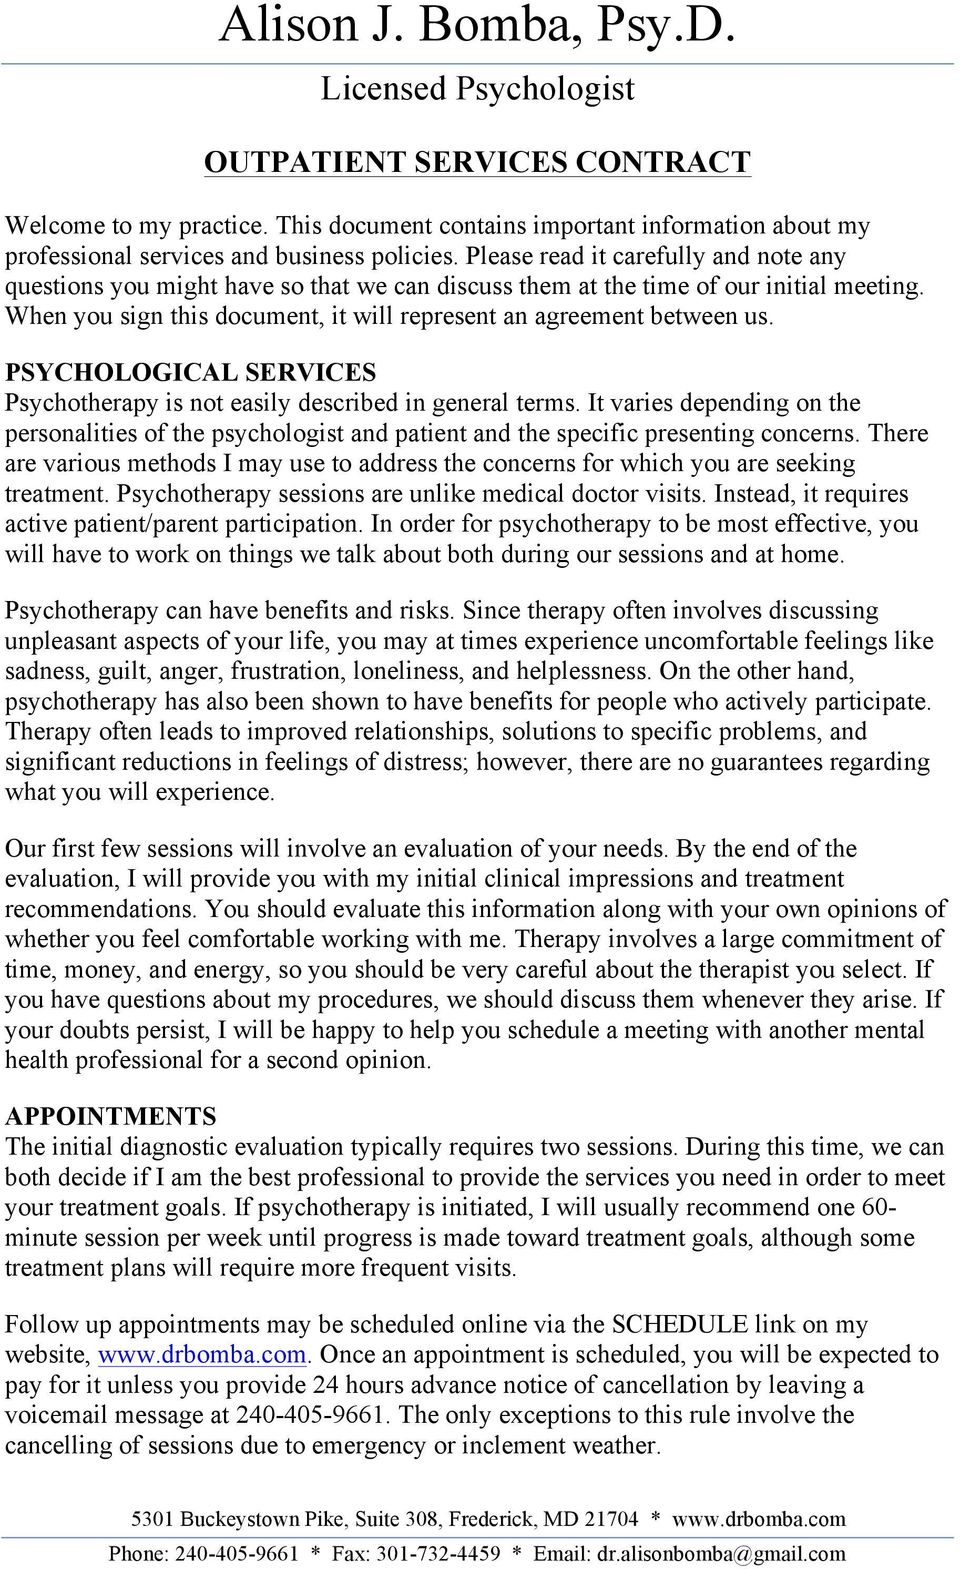 PSYCHOLOGICAL SERVICES Psychotherapy is not easily described in general terms. It varies depending on the personalities of the psychologist and patient and the specific presenting concerns.